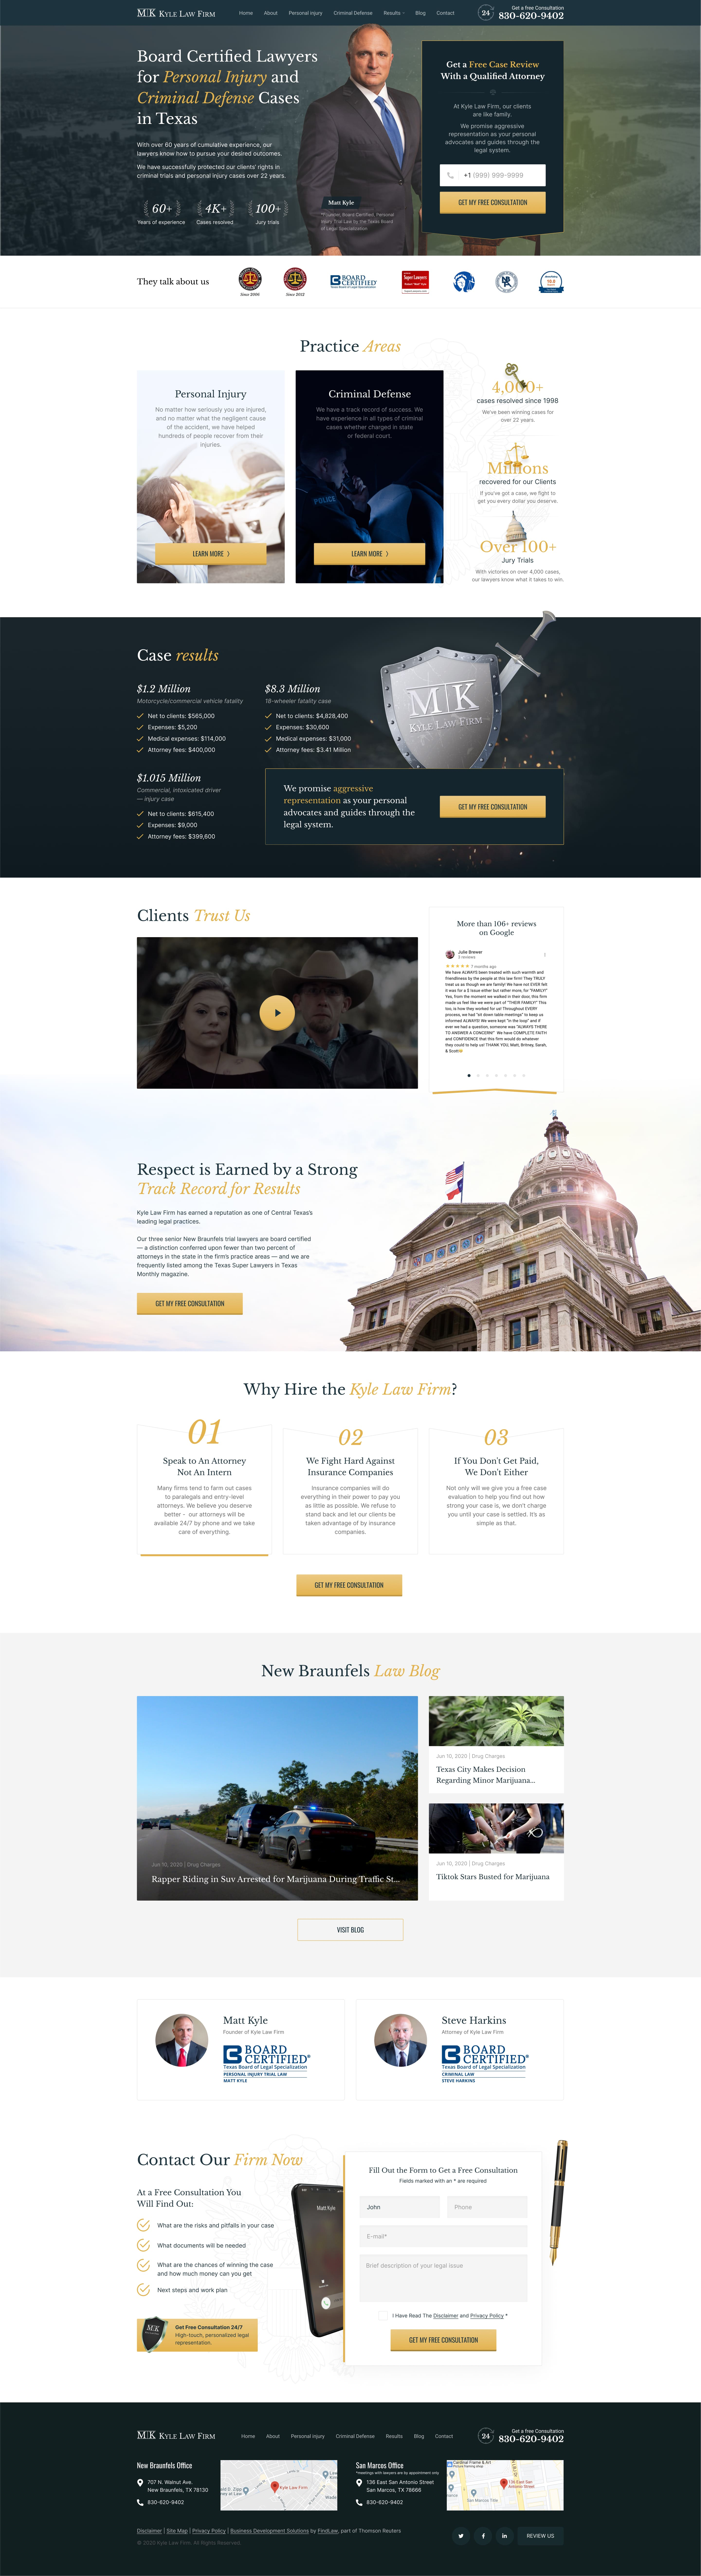 Kyle Law Firm main page